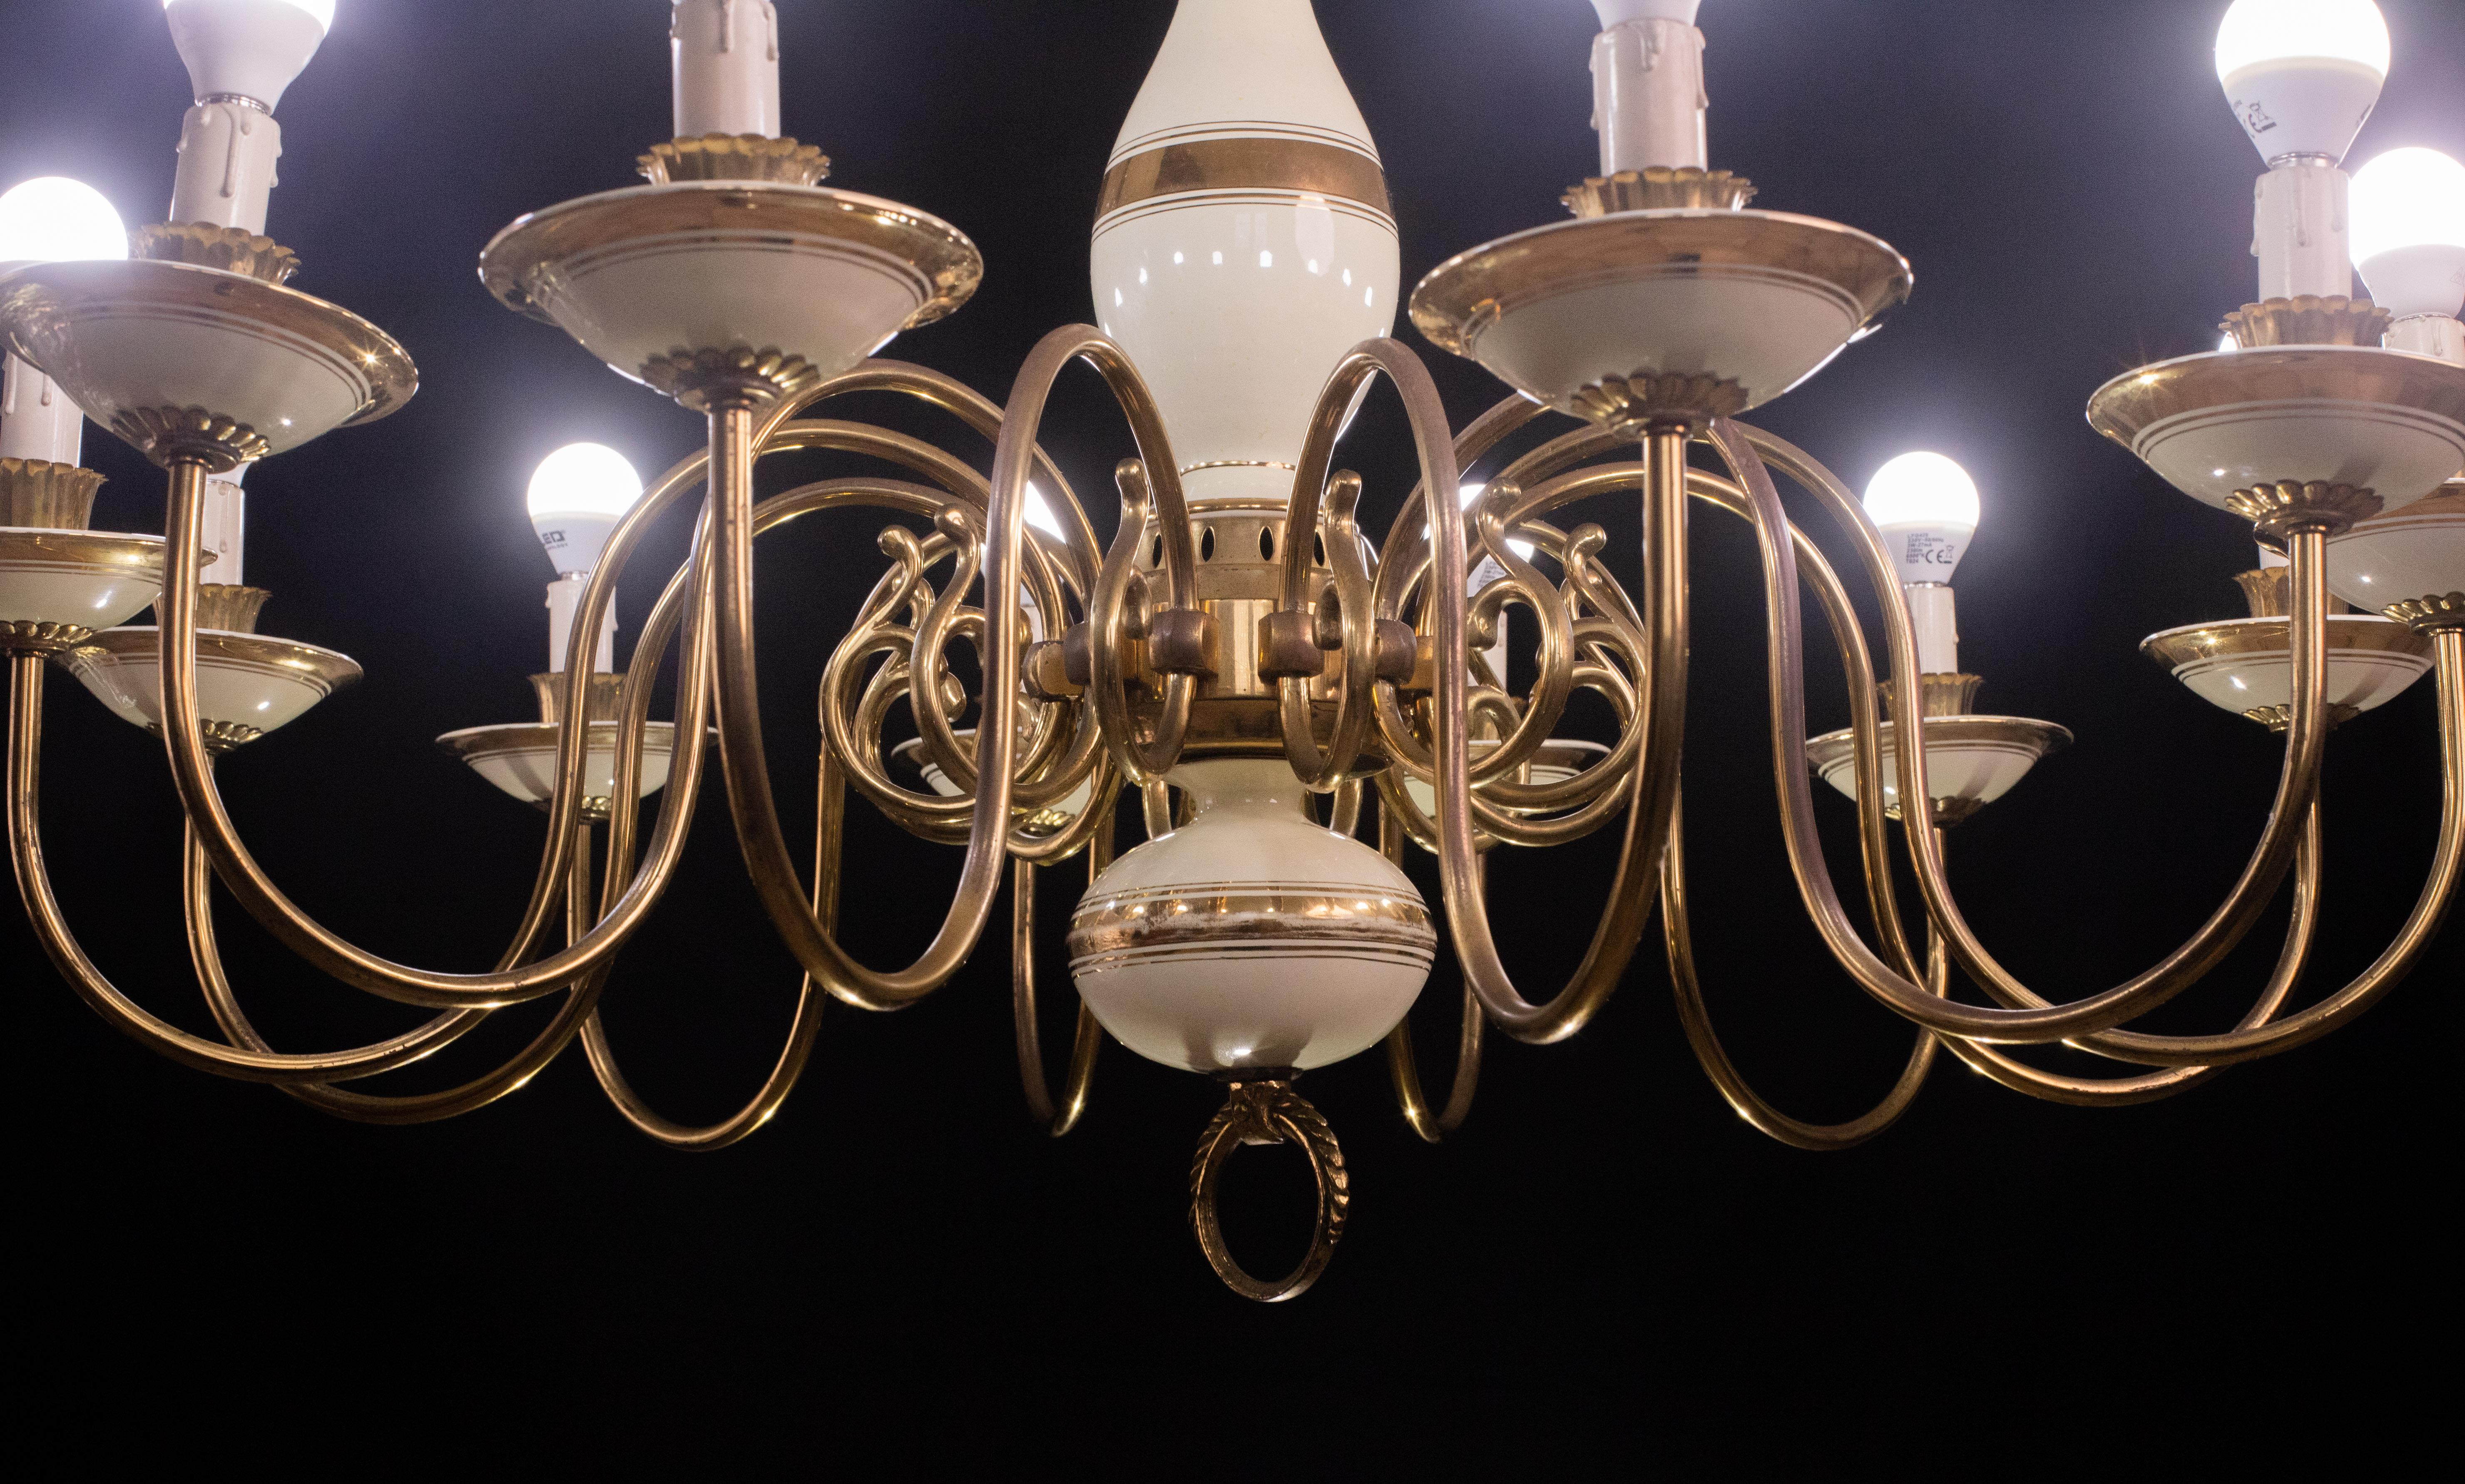 Monumental 12 Lights Art Deco Brass and Ceramic Chandelier, 1950s For Sale 2